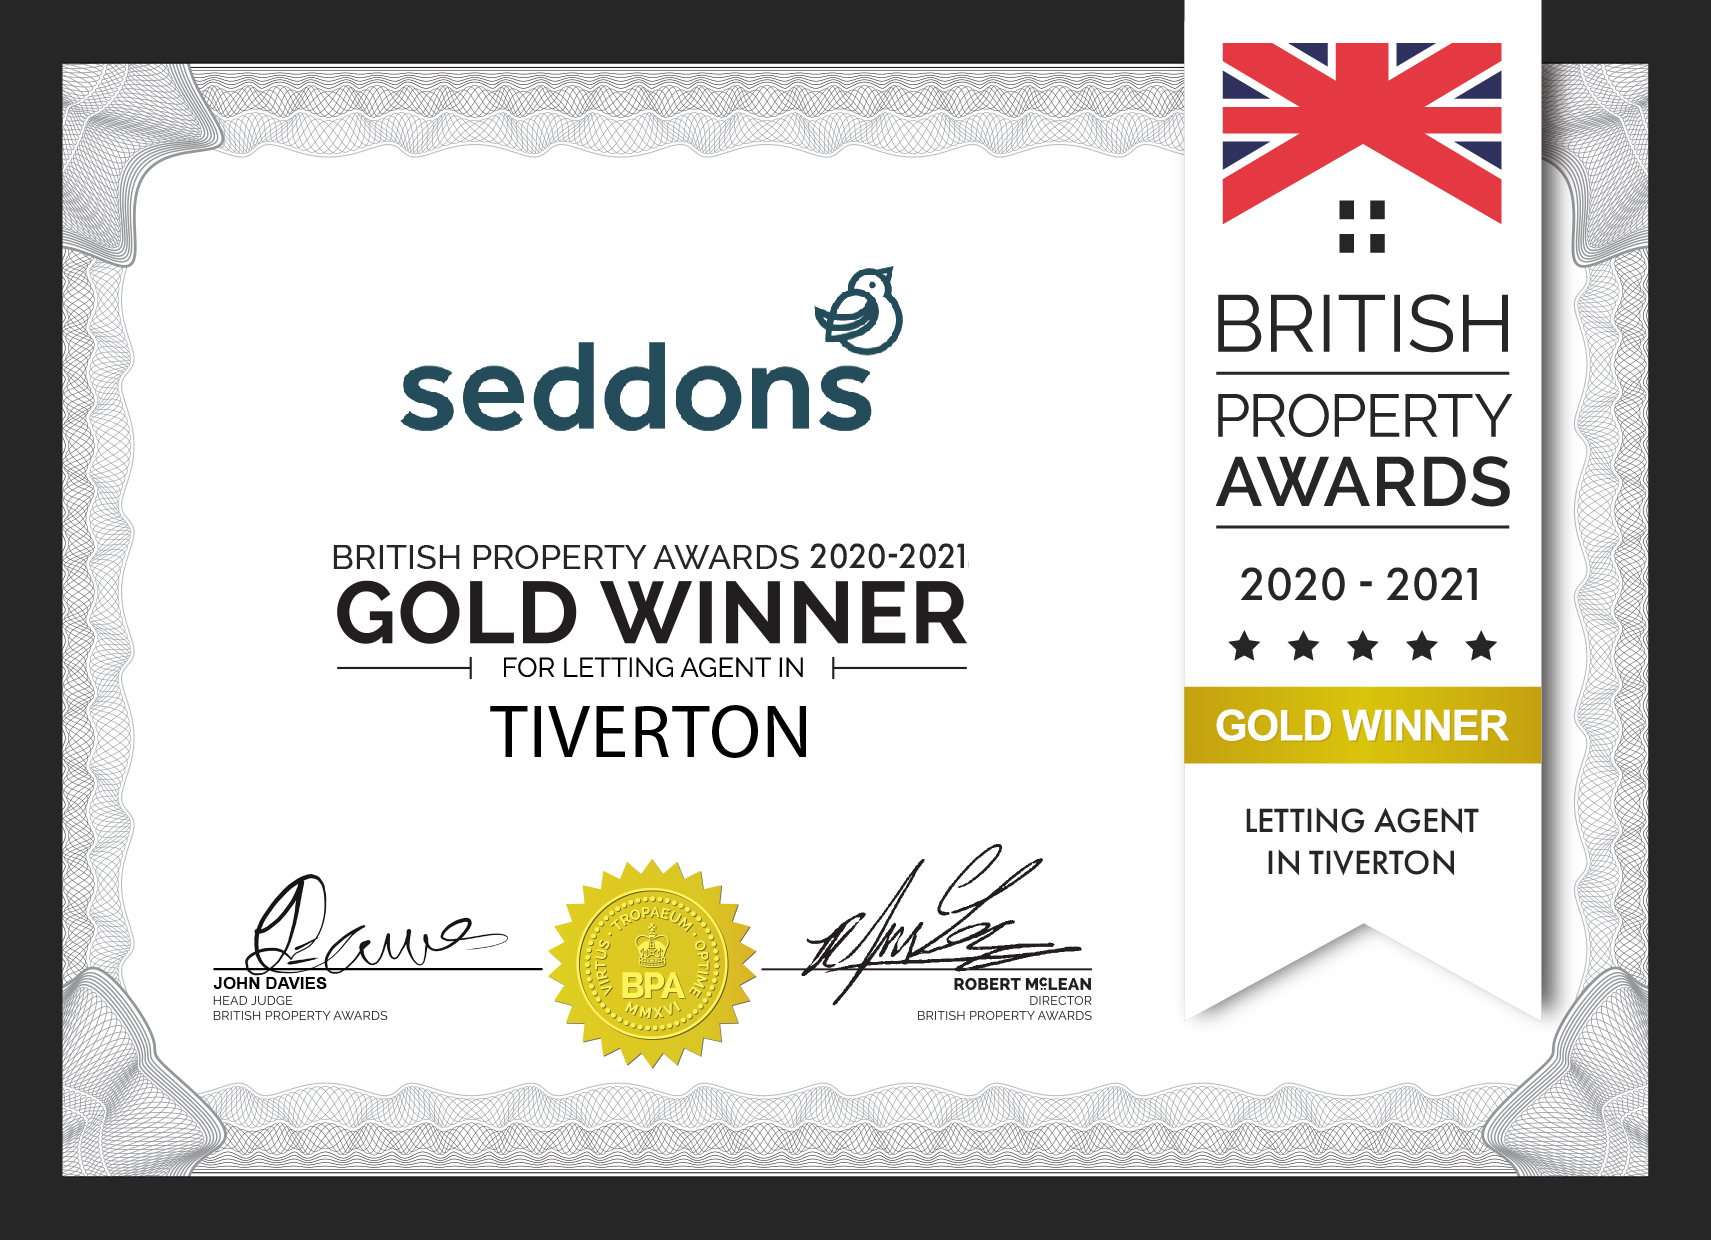 GOLD WINNER for The British Property Awards